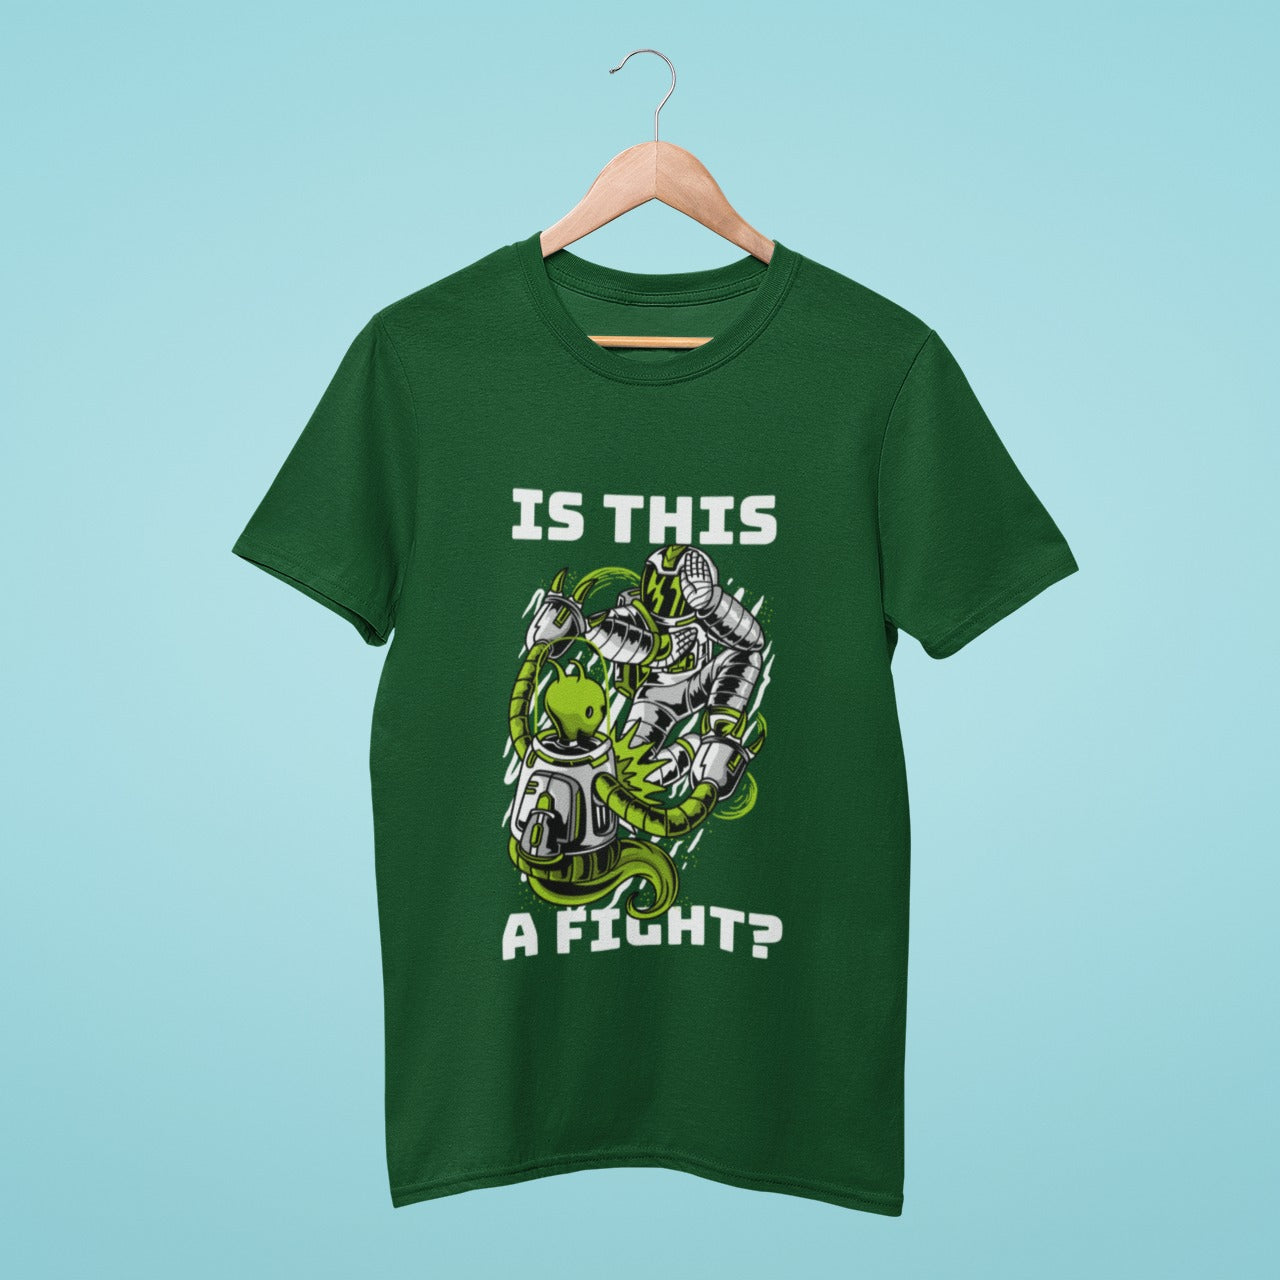 Elevate your fashion game with our green t-shirt featuring a striking design of an astronaut and an alien in combat, with the question "Is This a Fight?". Perfect for sci-fi enthusiasts and those who love bold fashion. Made from high-quality materials, this comfortable and durable t-shirt is a must-have. Order now and show off your love for intergalactic battles!